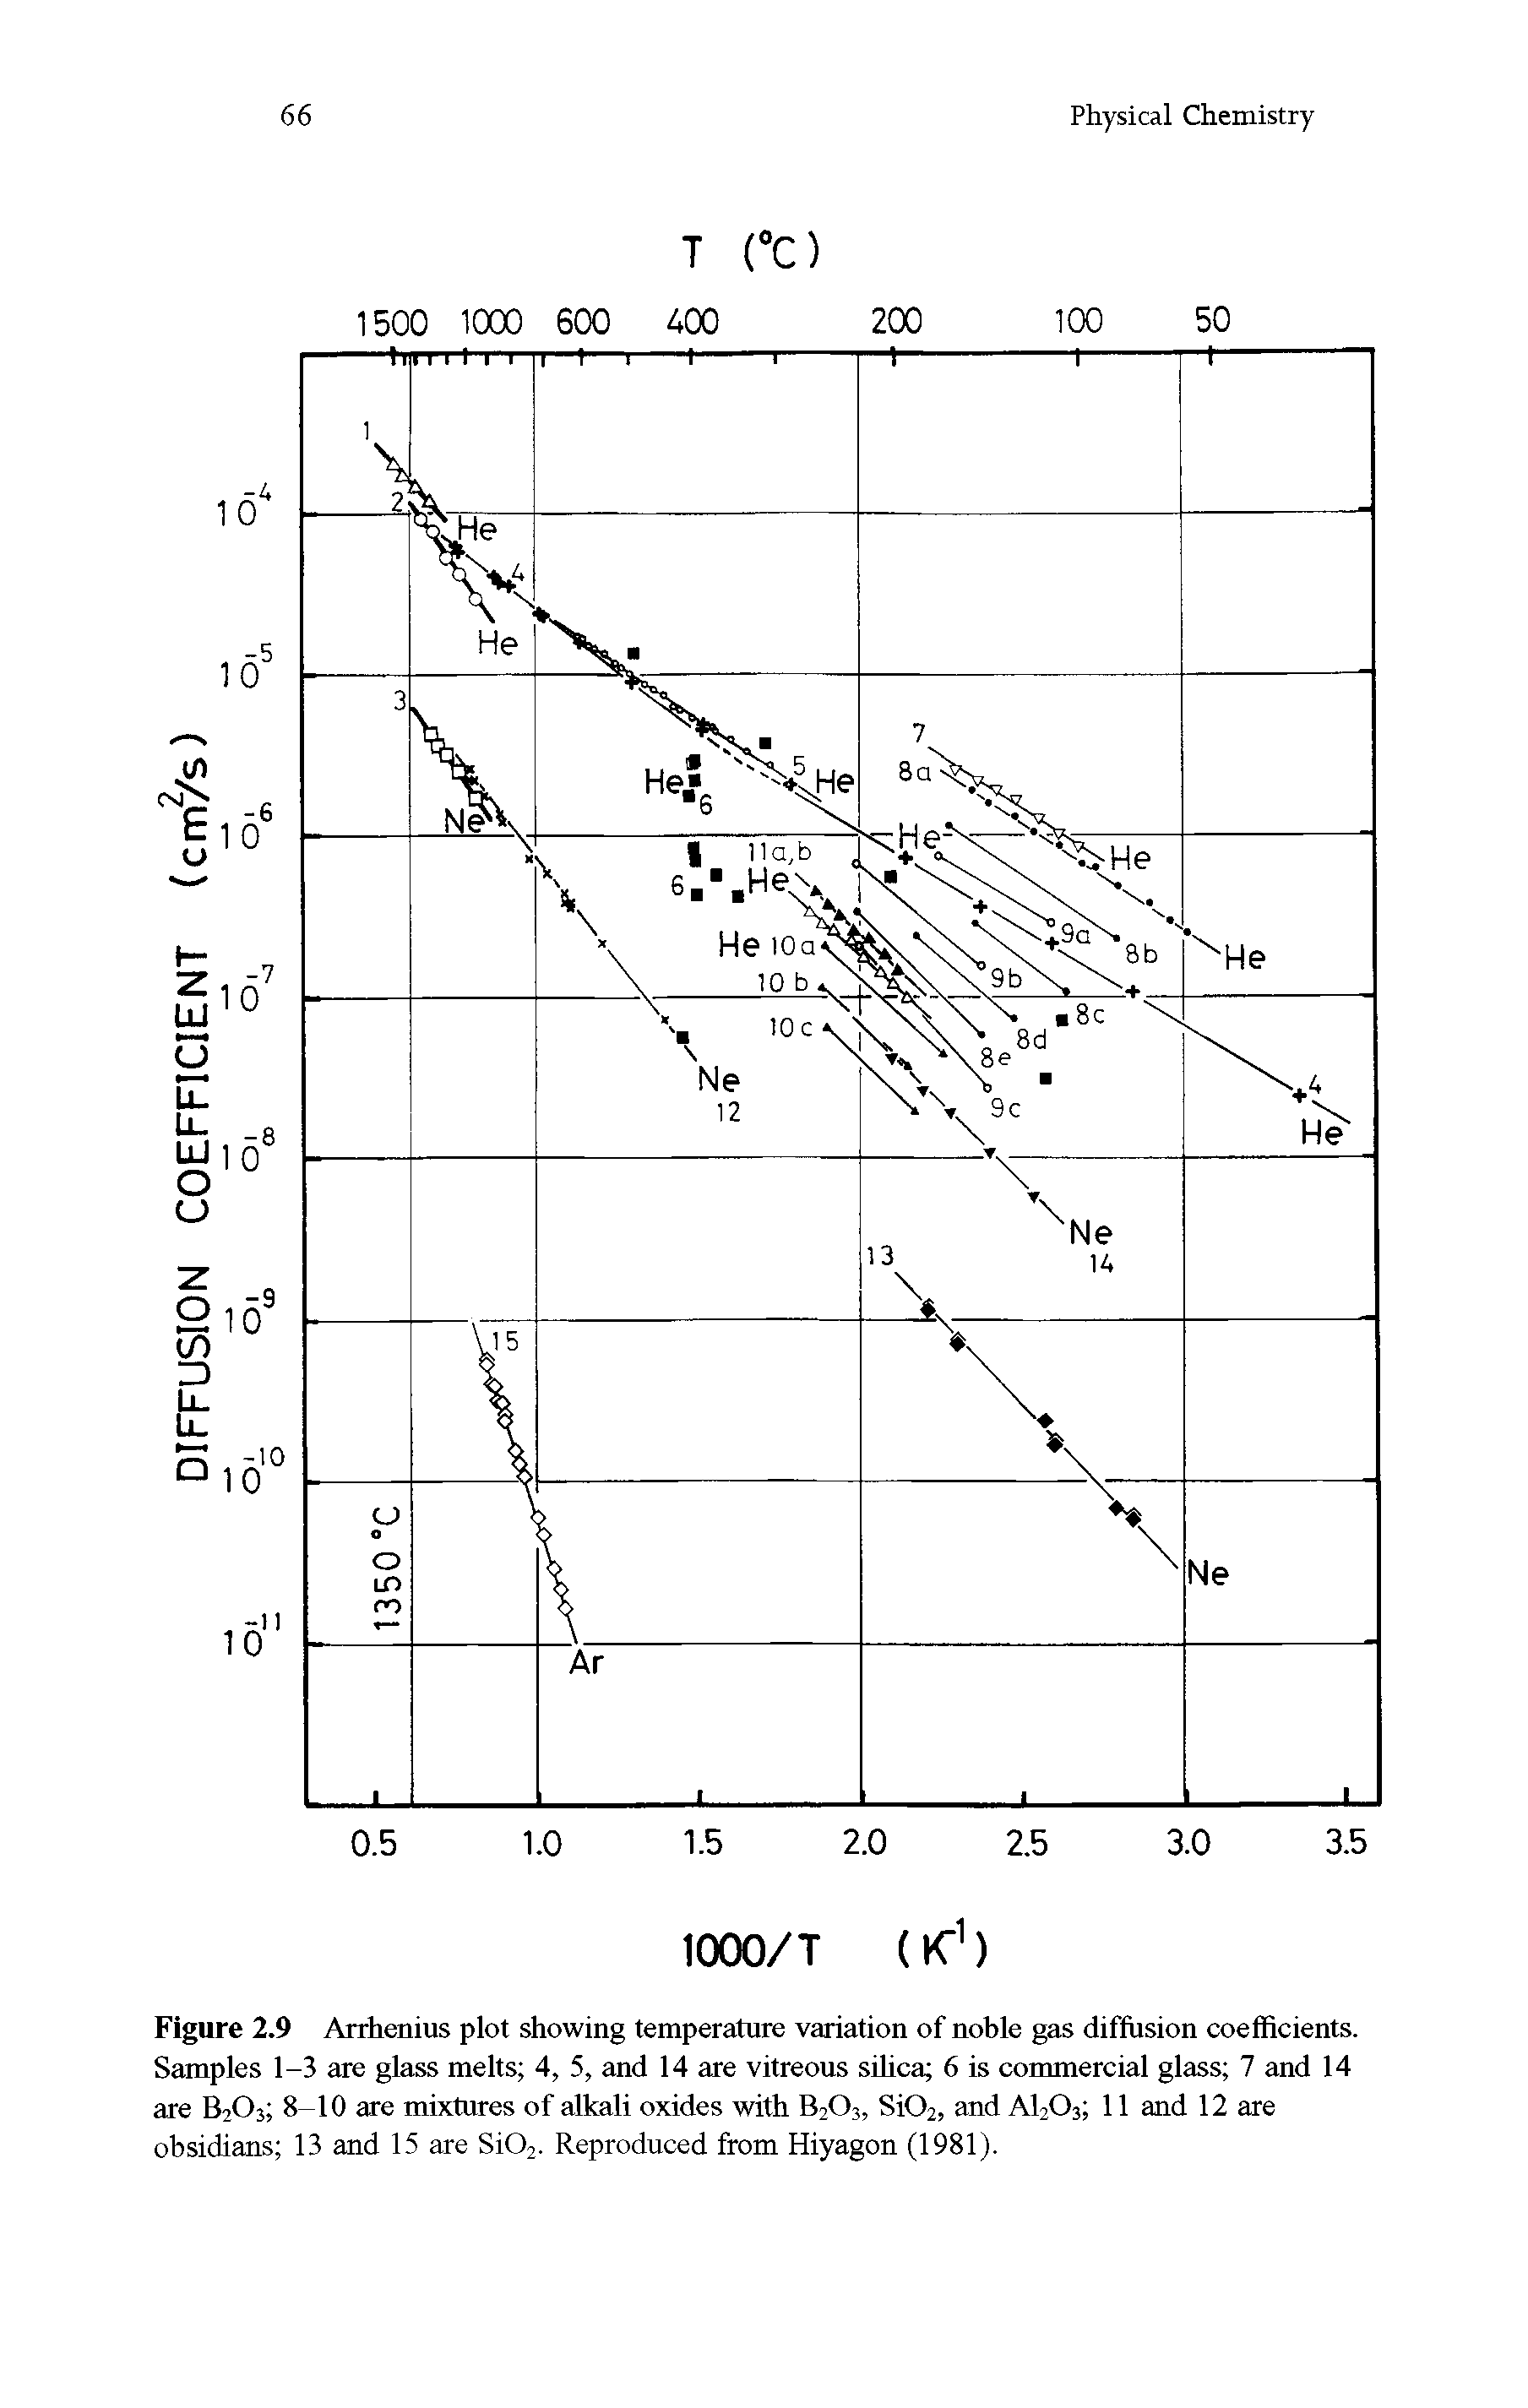 Figure 2.9 Arrhenius plot showing temperature variation of nohle gas diffusion coefficients. Samples 1-3 are glass melts 4, 5, and 14 are vitreous silica 6 is commercial glass 7 and 14 are B203 8-10 are mixtures of alkali oxides with B203, Si02, and A1203 11 and 12 are obsidians 13 and 15 are Si02. Reproduced from Hiyagon (1981).